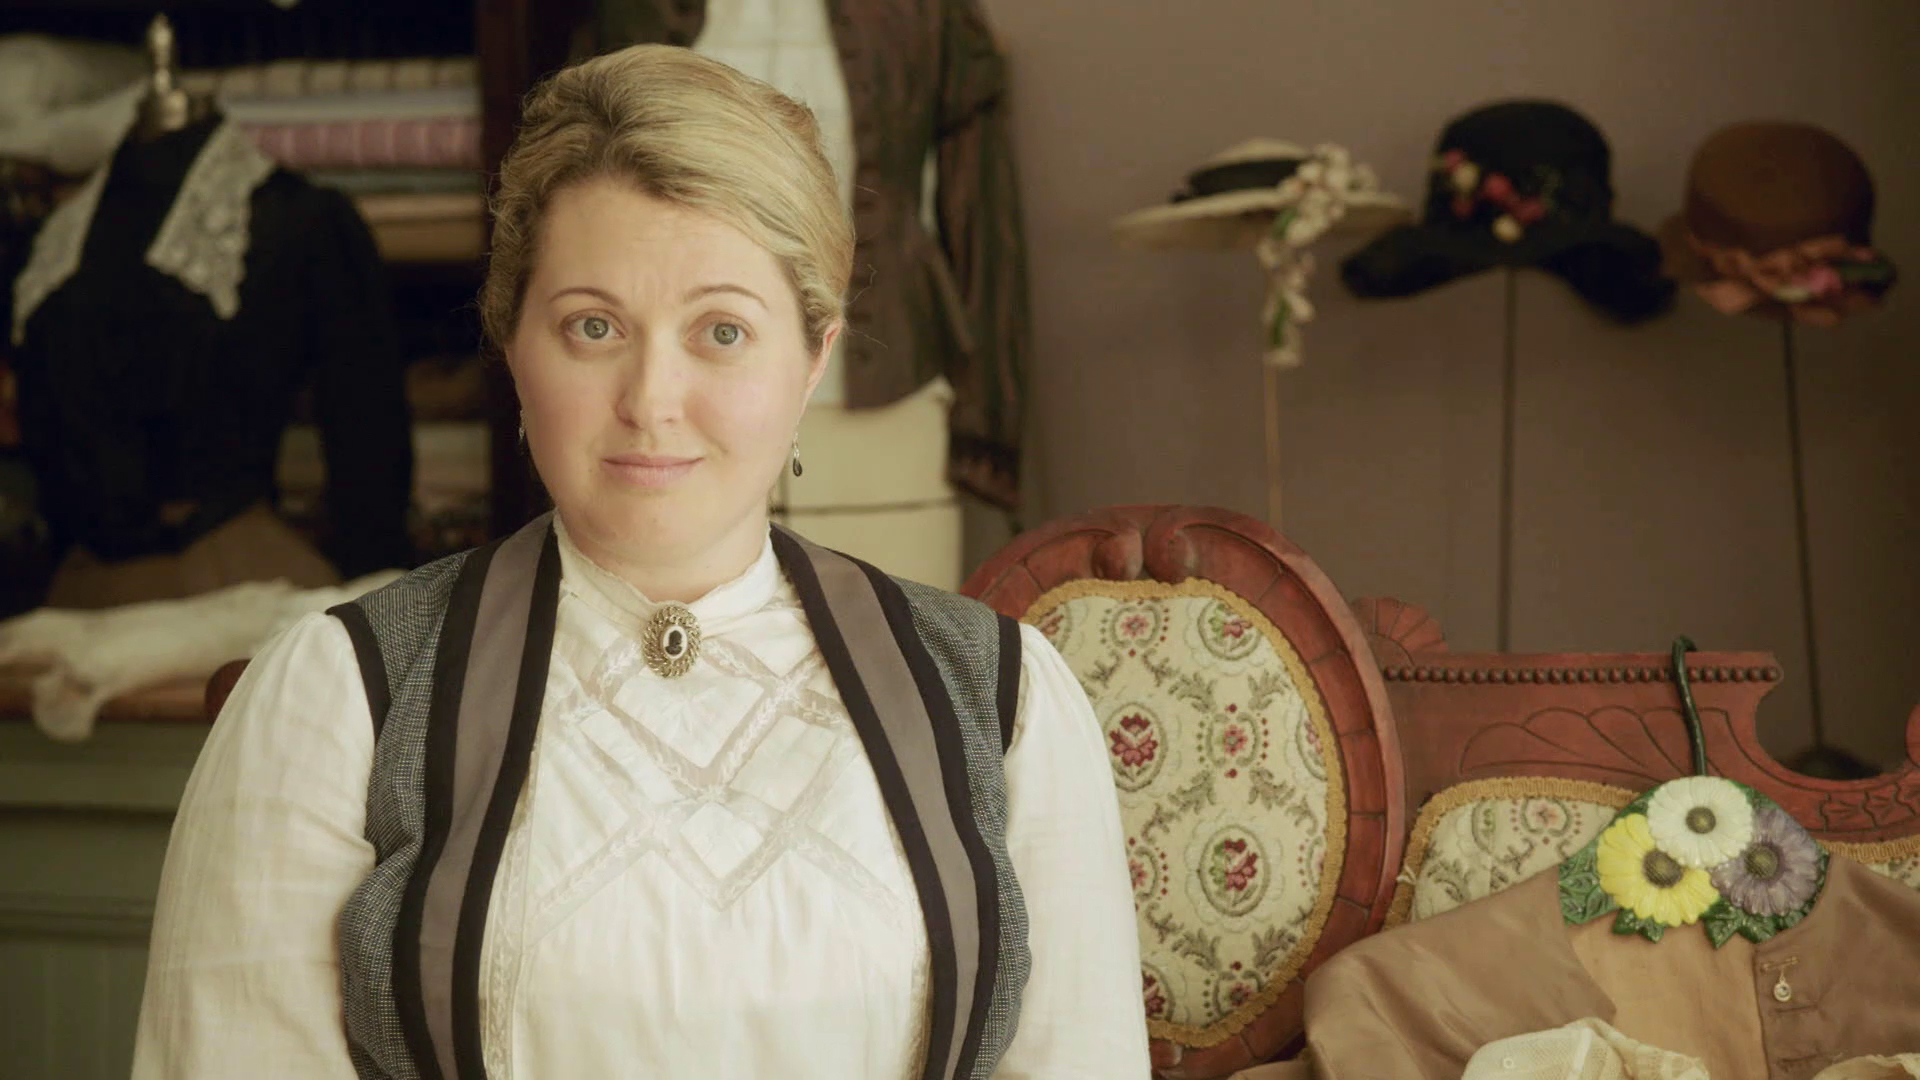 Kirstin Howell as Susan Smith in Lizzie Borden Took An Ax